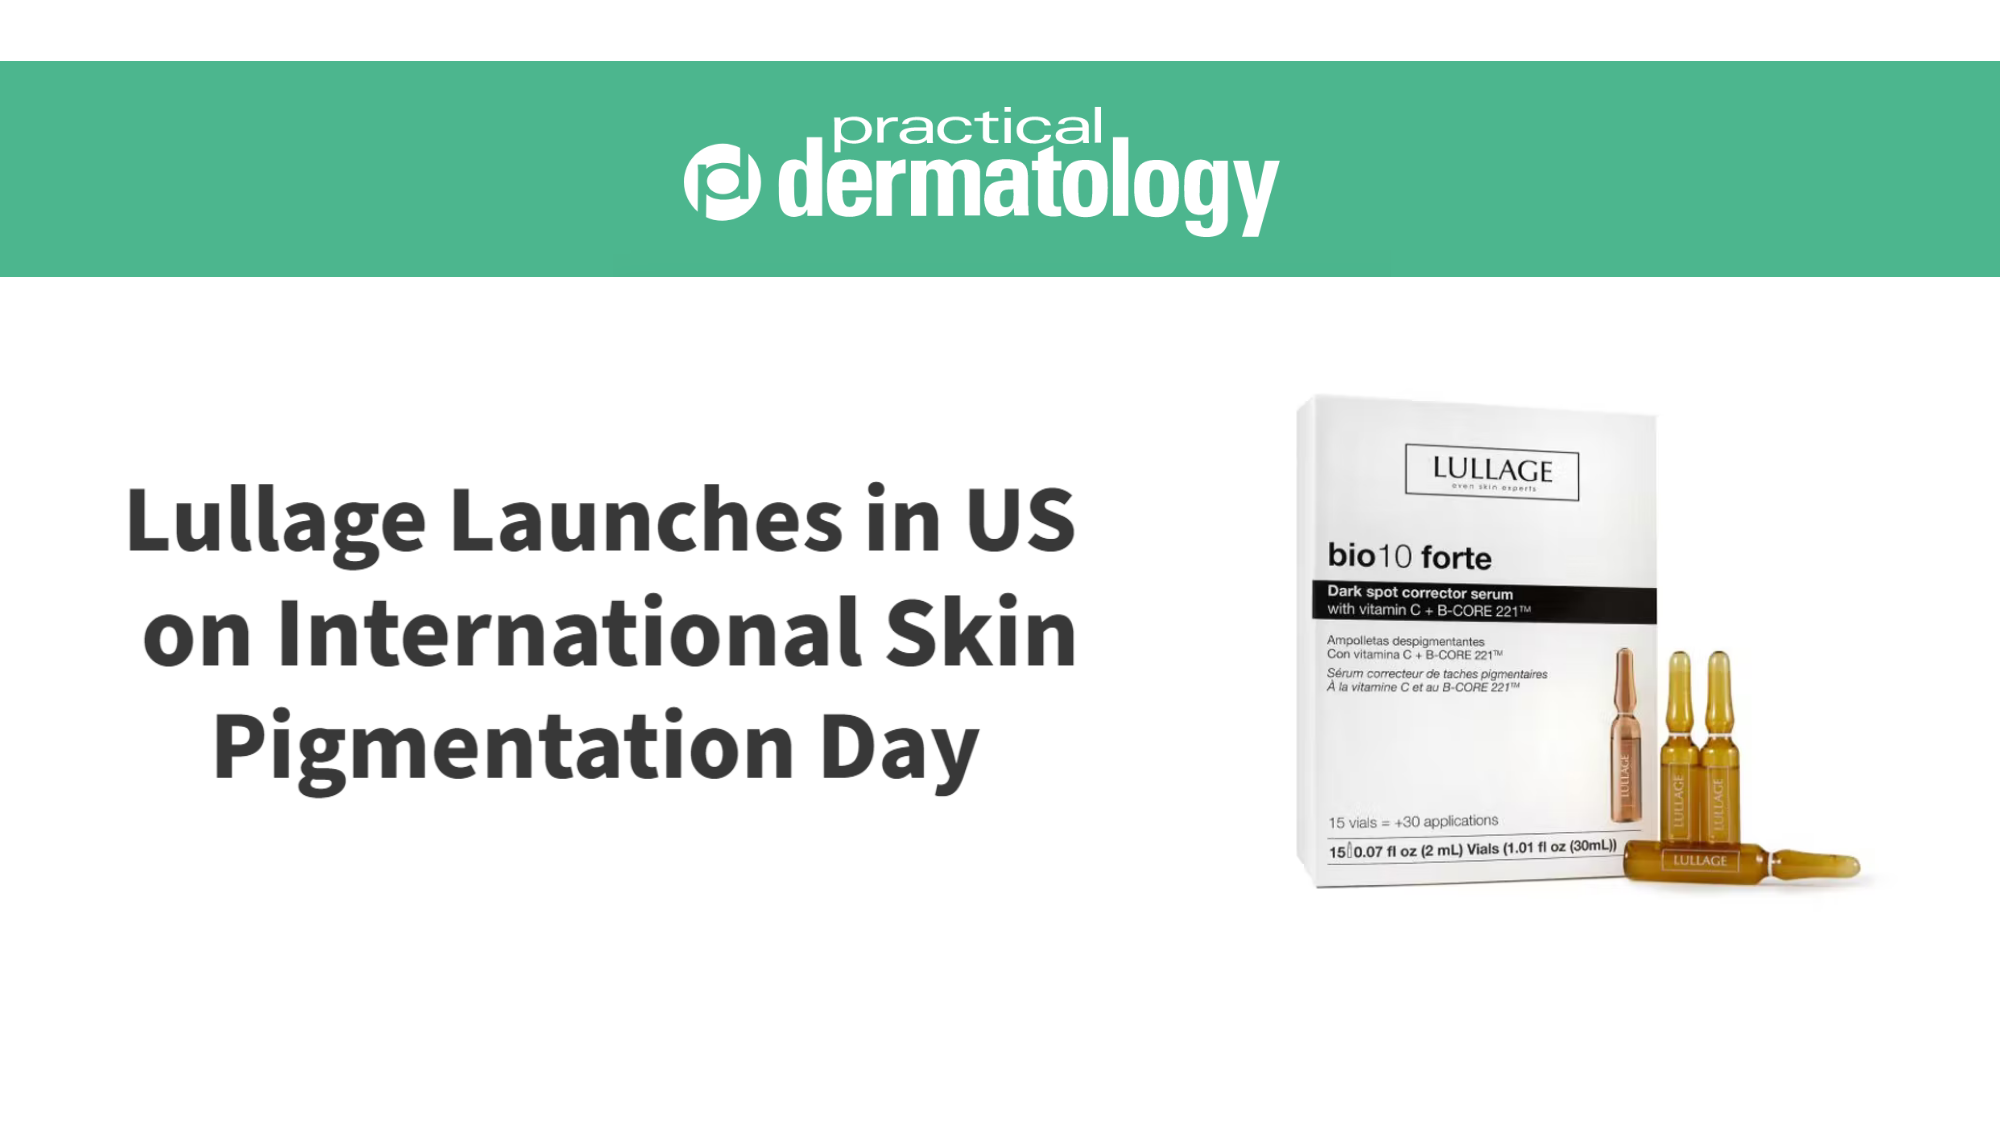 The American magazine Practical Dermatology discusses Skin Pigmentation Day